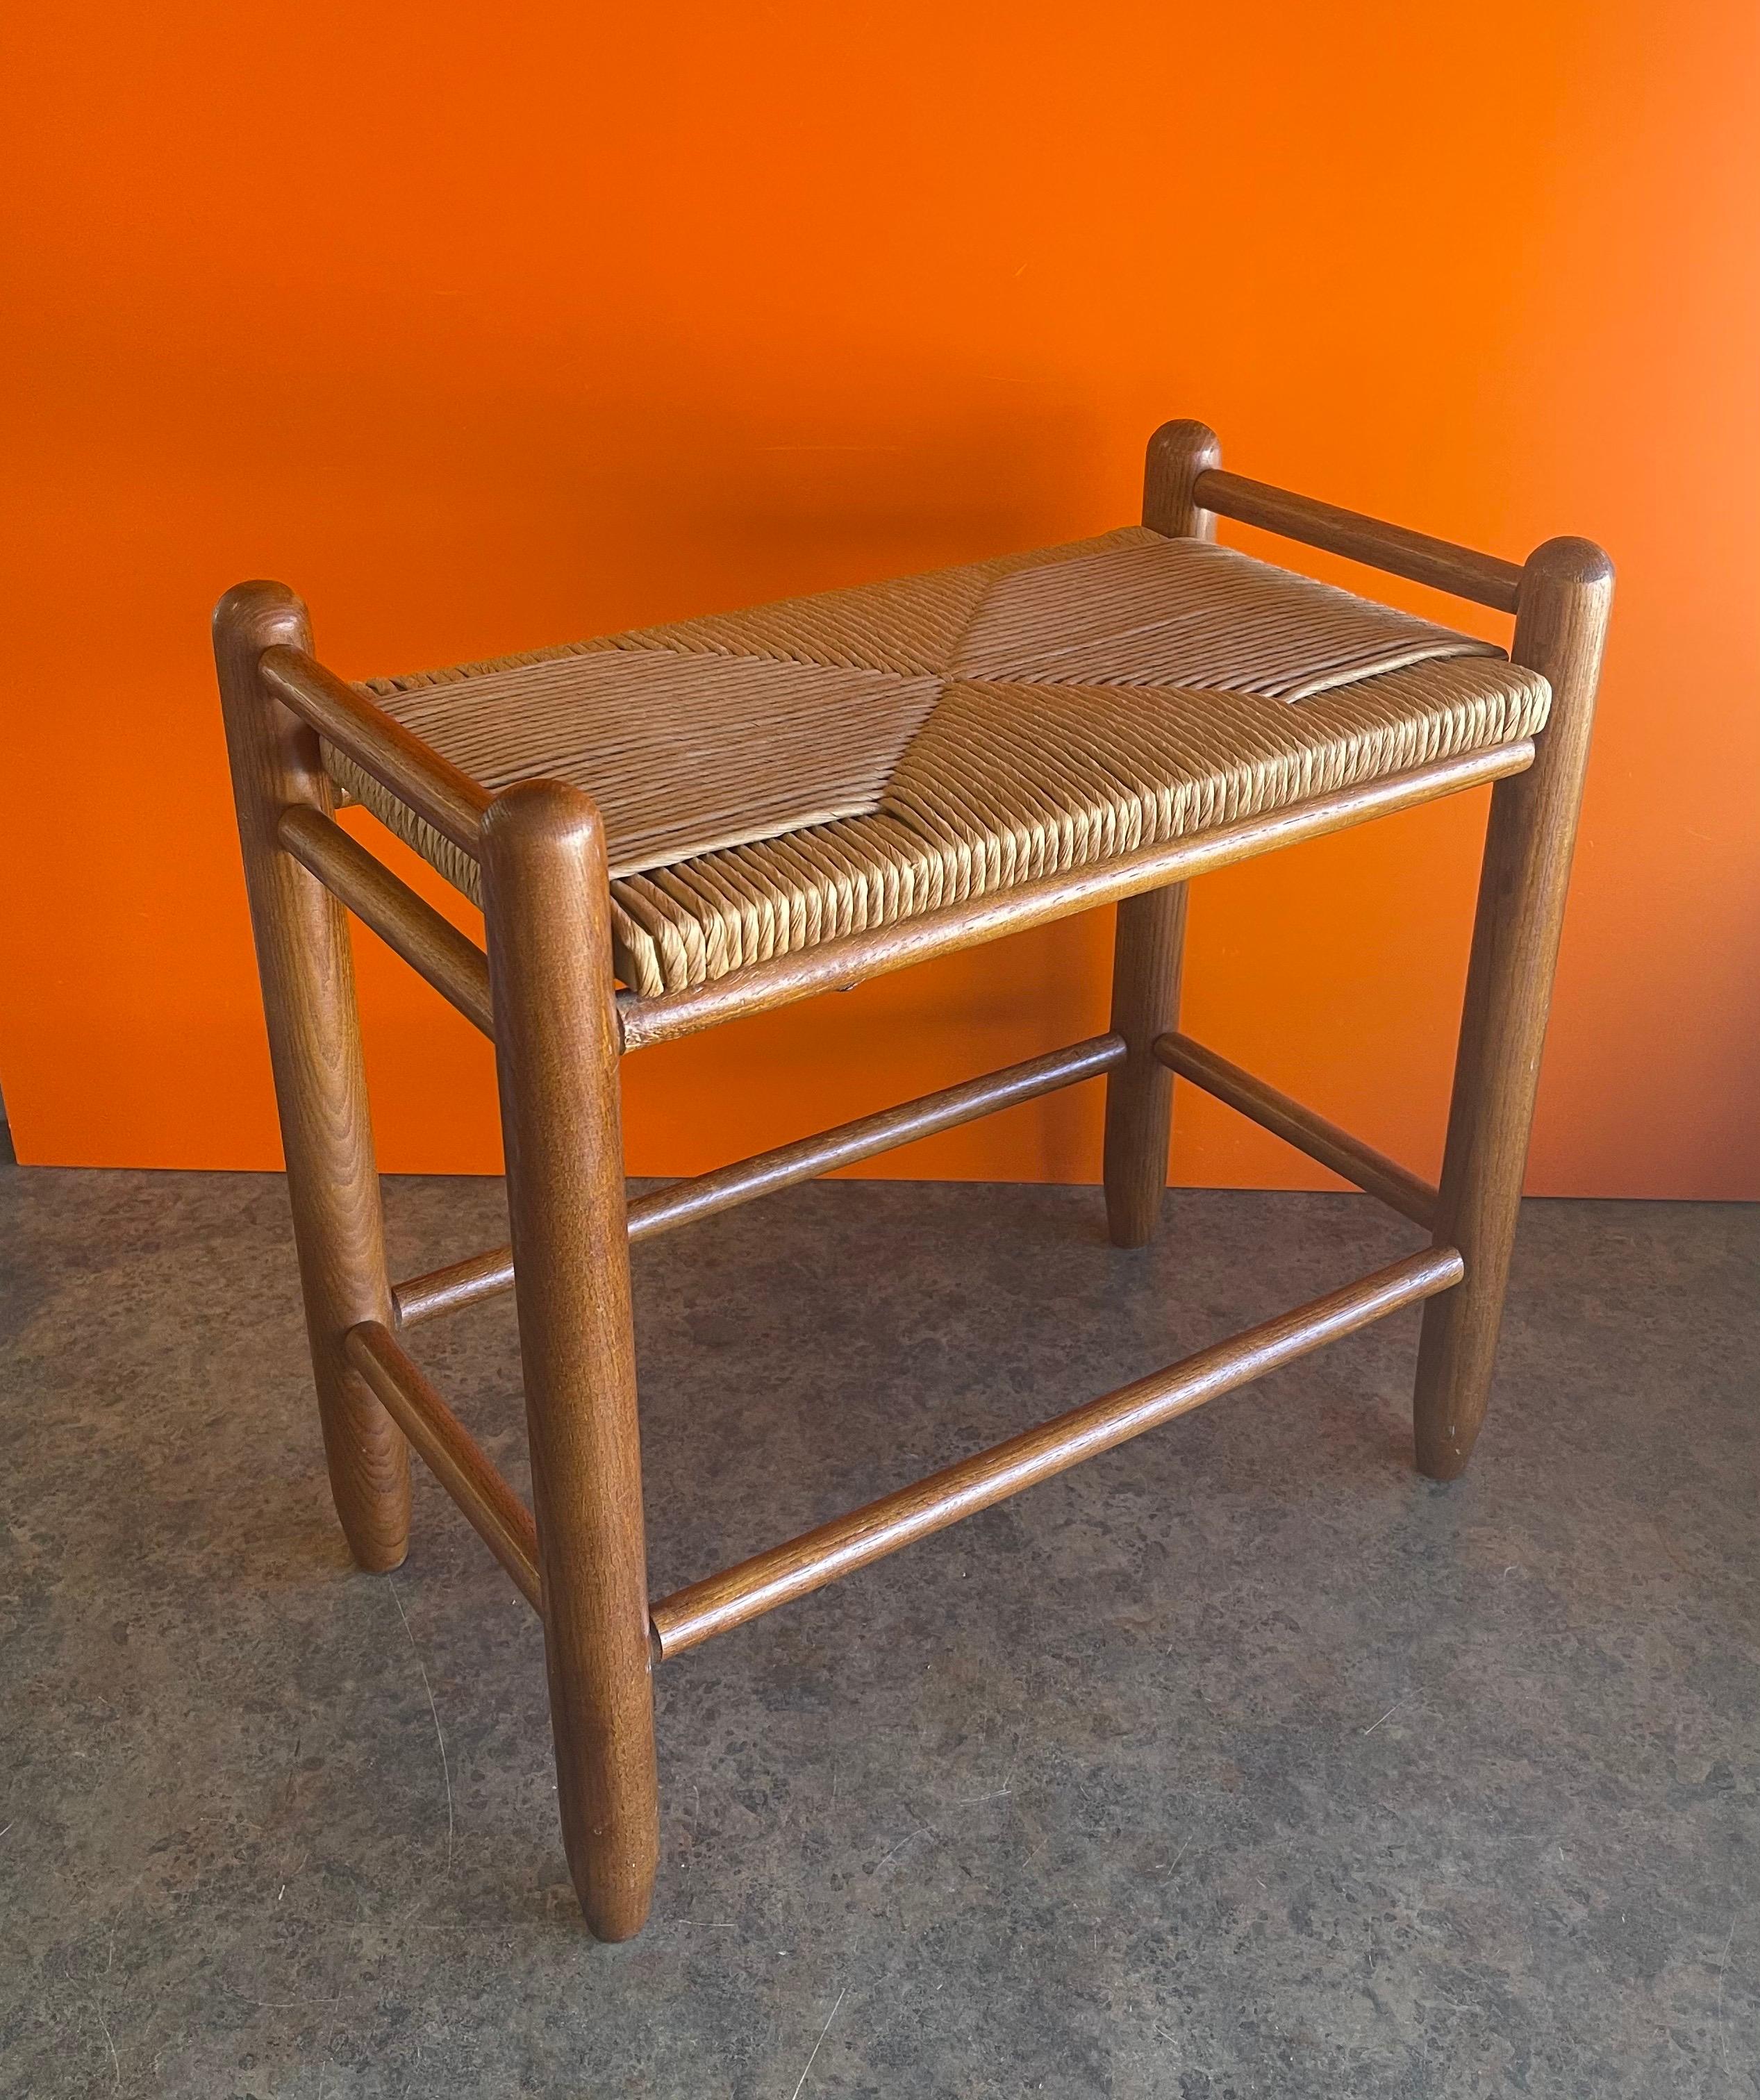 Versatile Danish modern stool / bench with hand woven paper cord seat, circa 1970s. The piece has a solid teak frame with stretchers and is quite solid and sturdy. The bases measures: 21